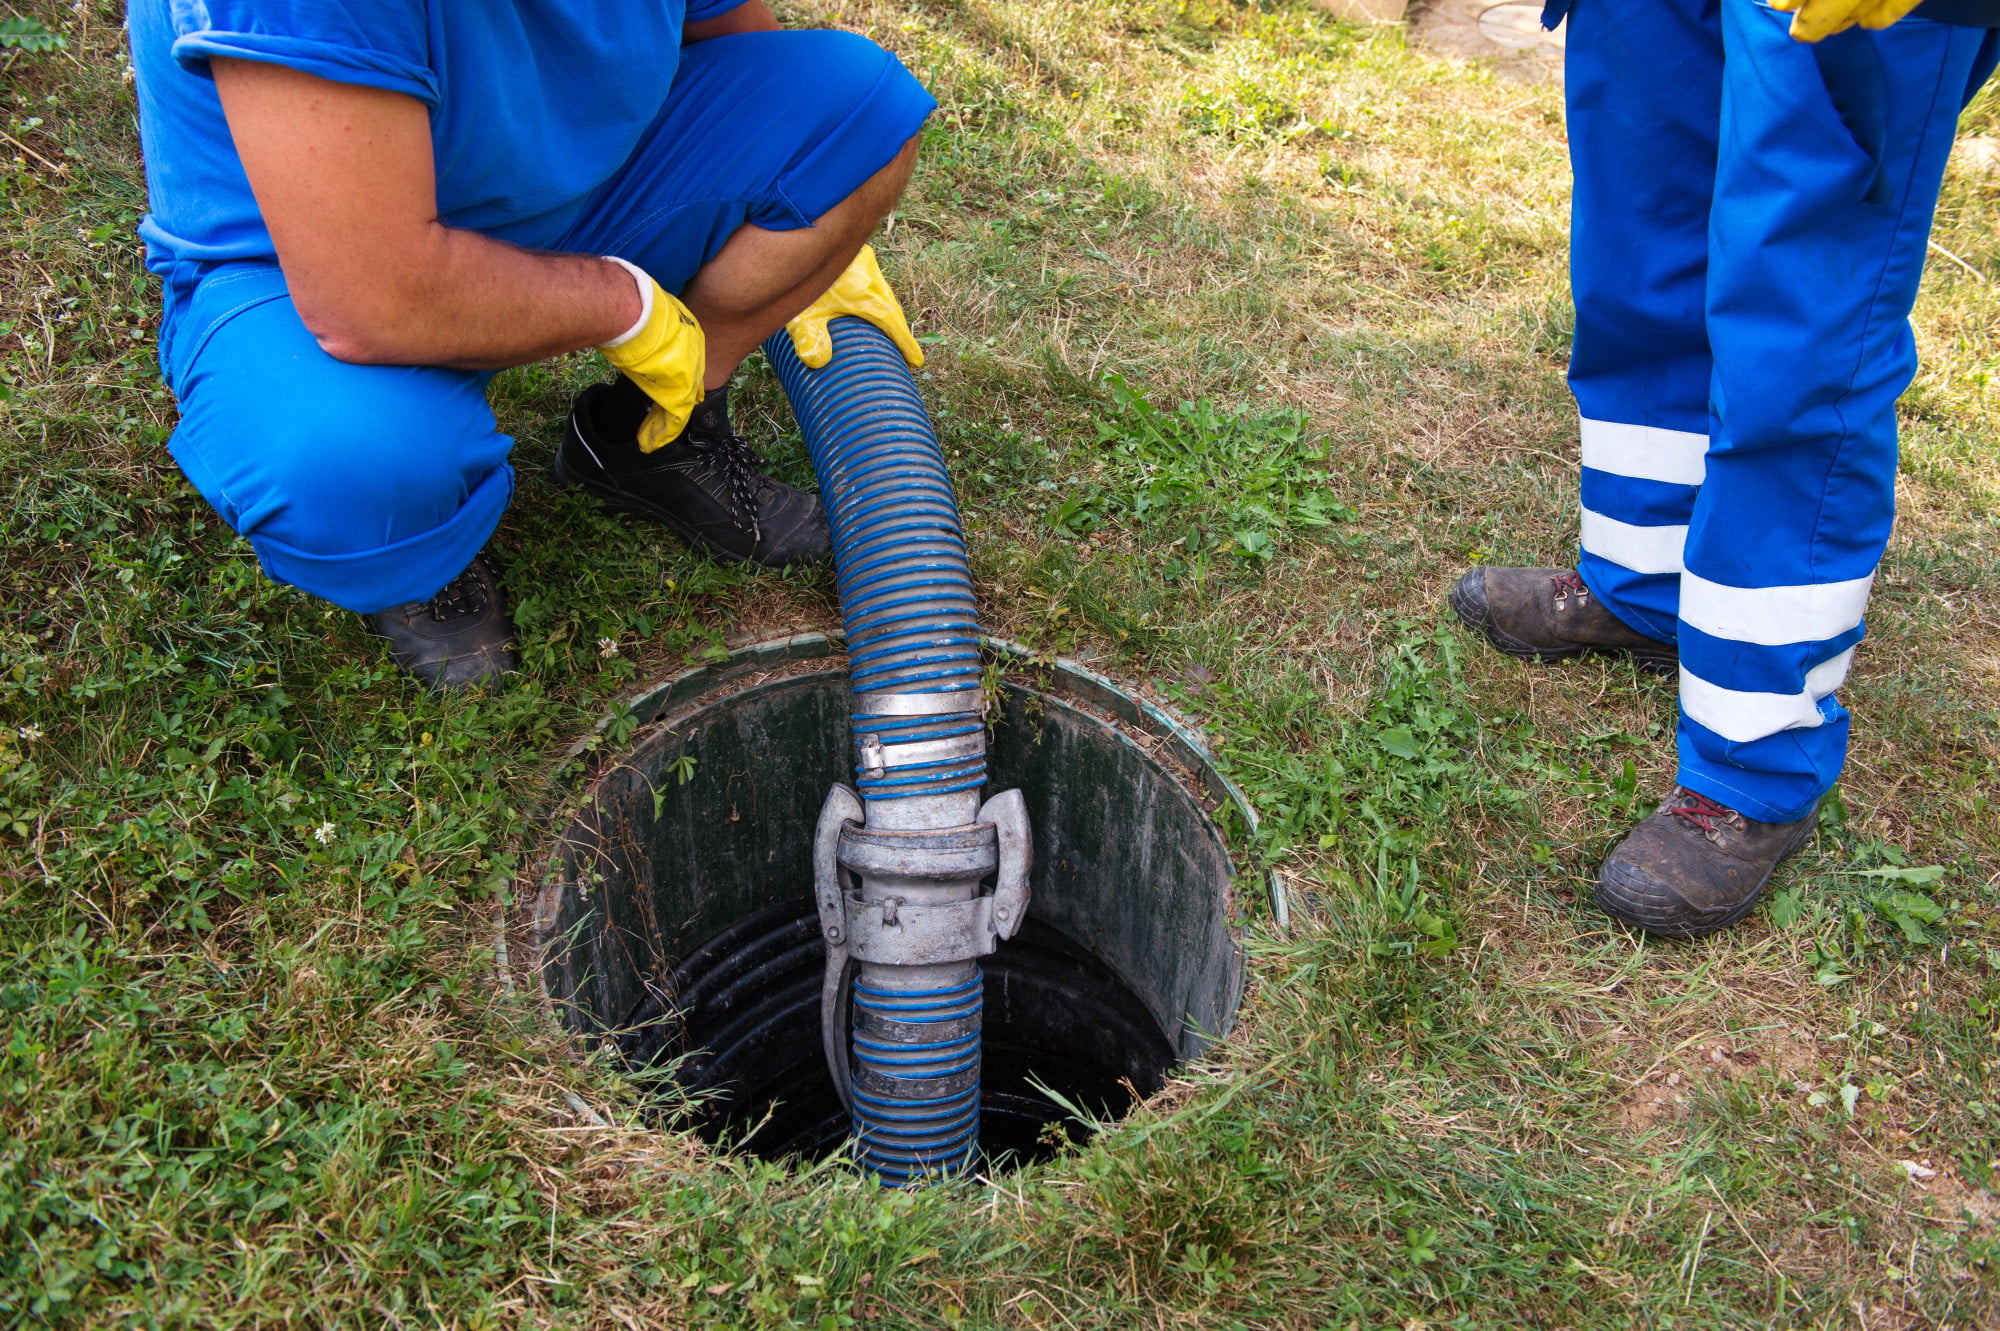 From clogged drains to foul smells see if you recognize any of these signs you need a septic inspection. Plus we have the right septic solutions for you.